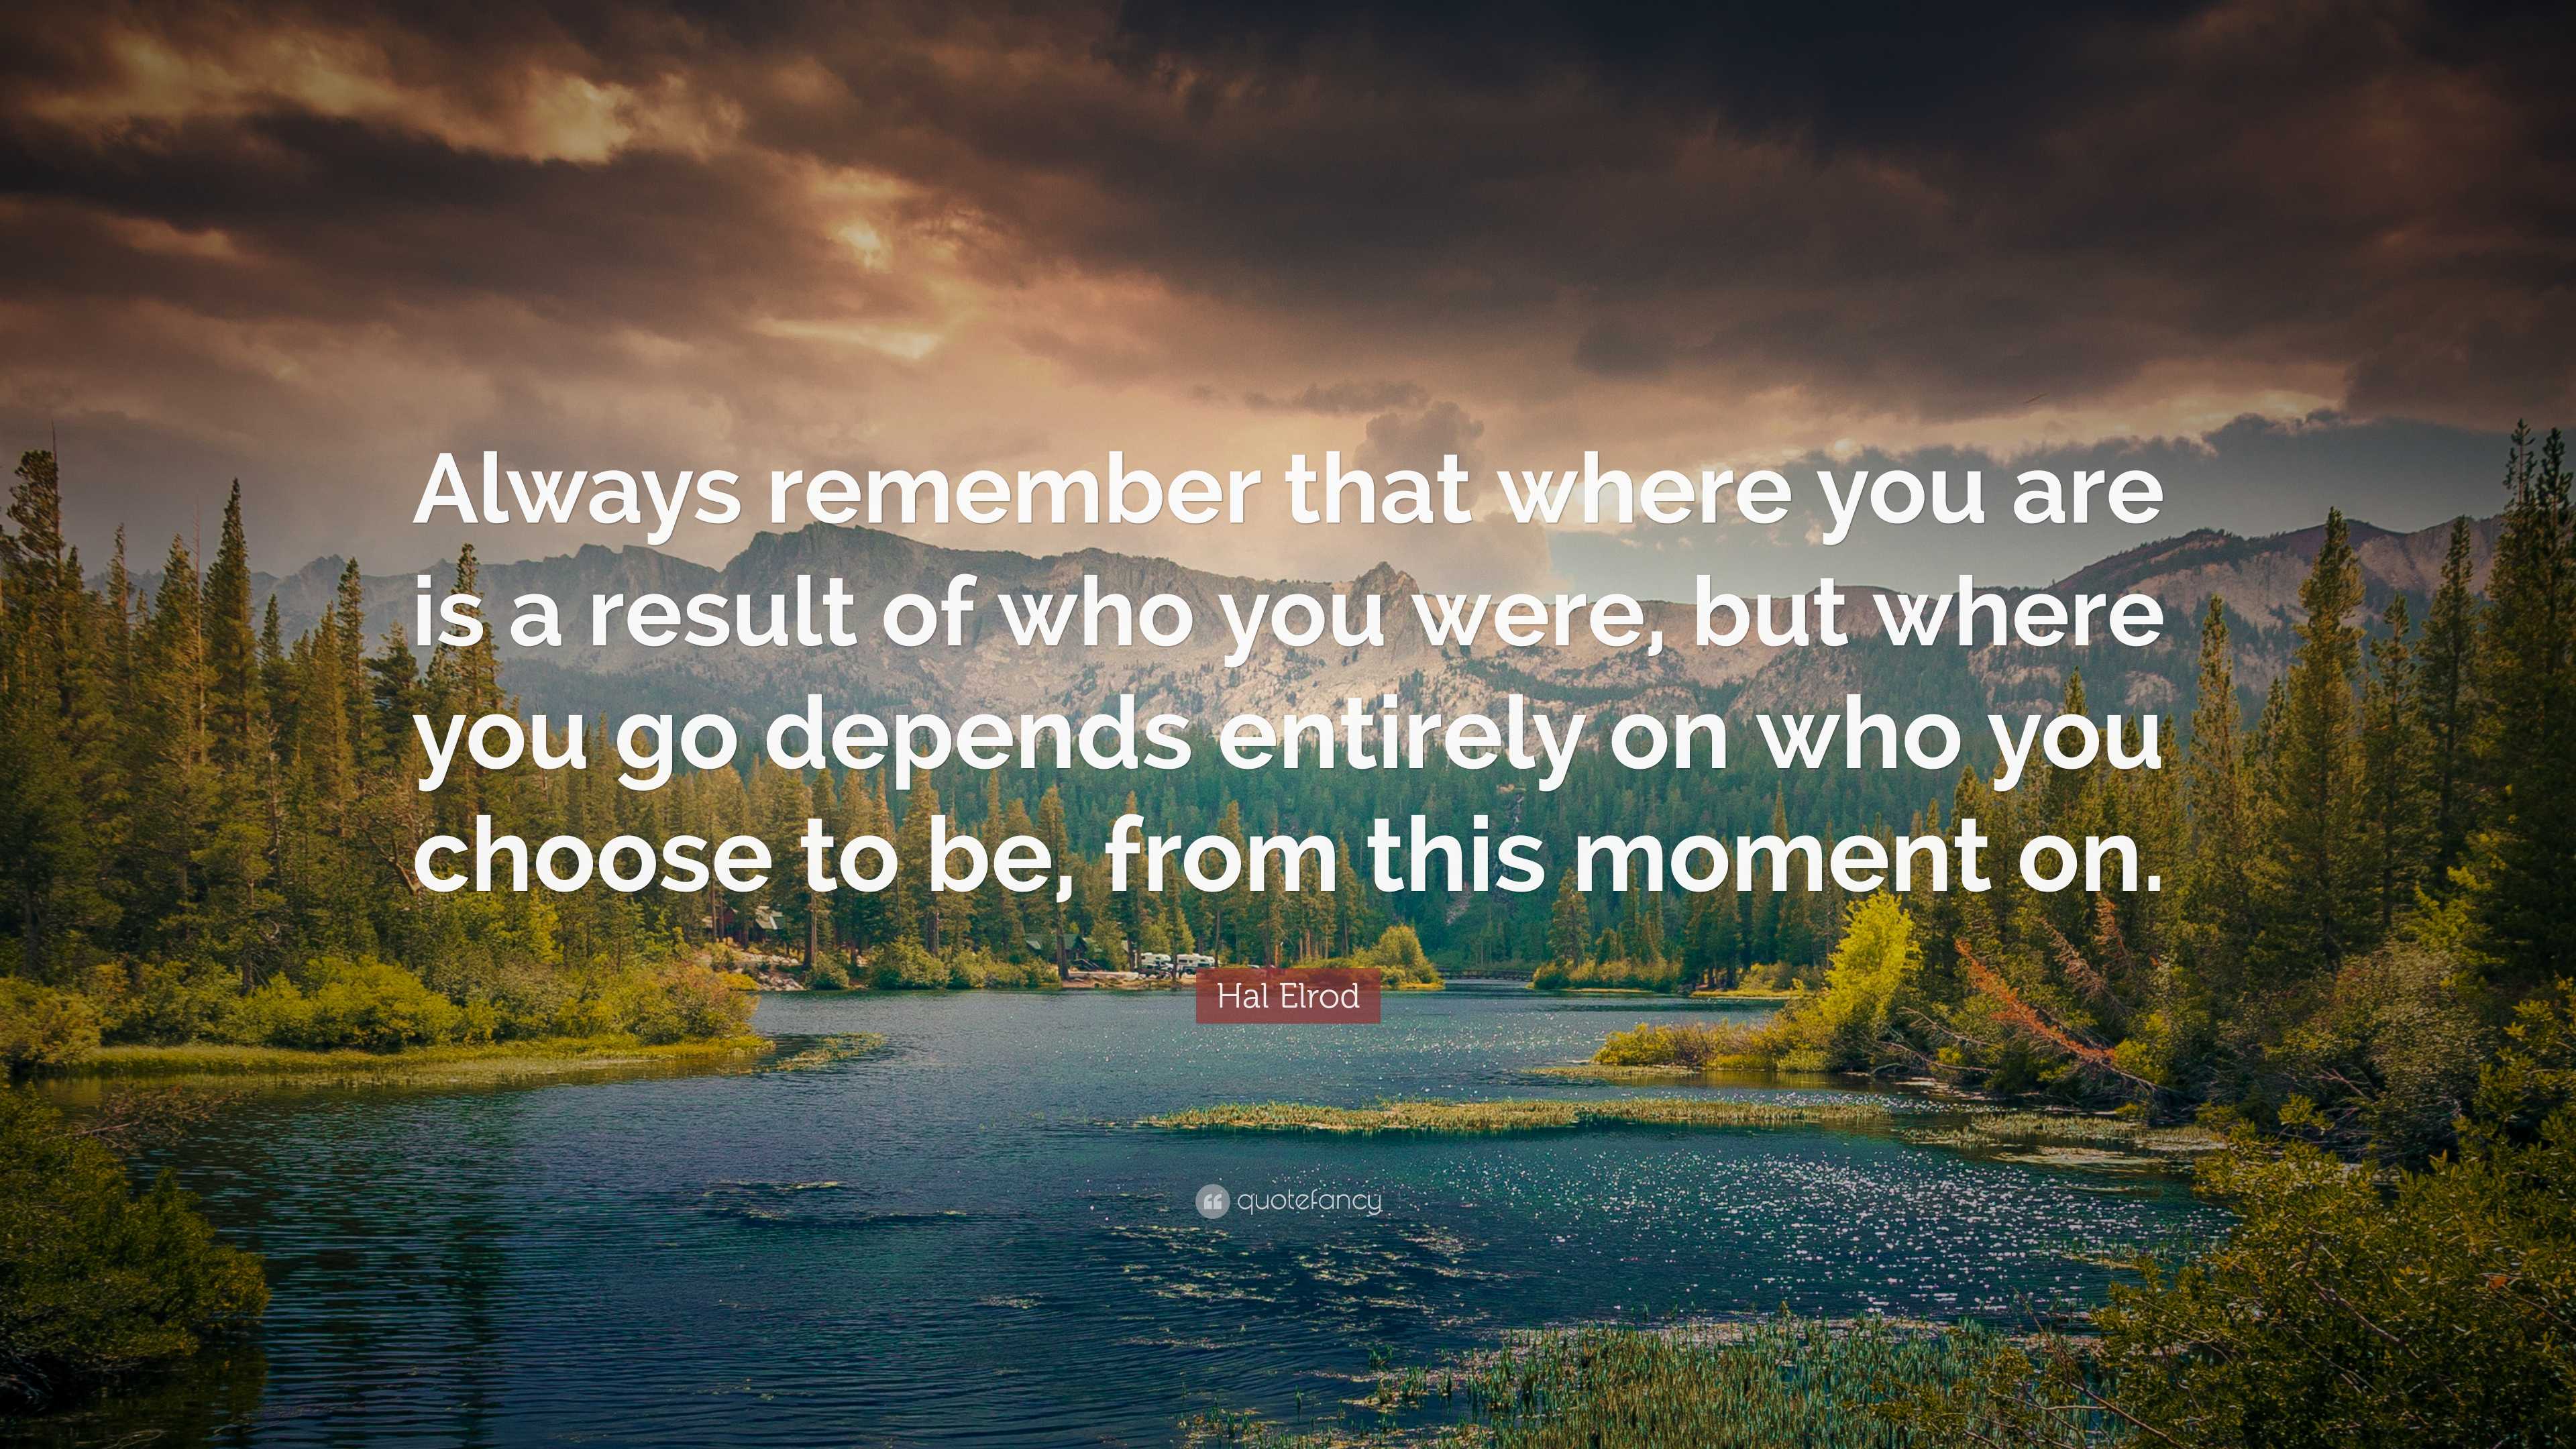 Hal Elrod Quote: “Always remember that where you are is a result of who ...